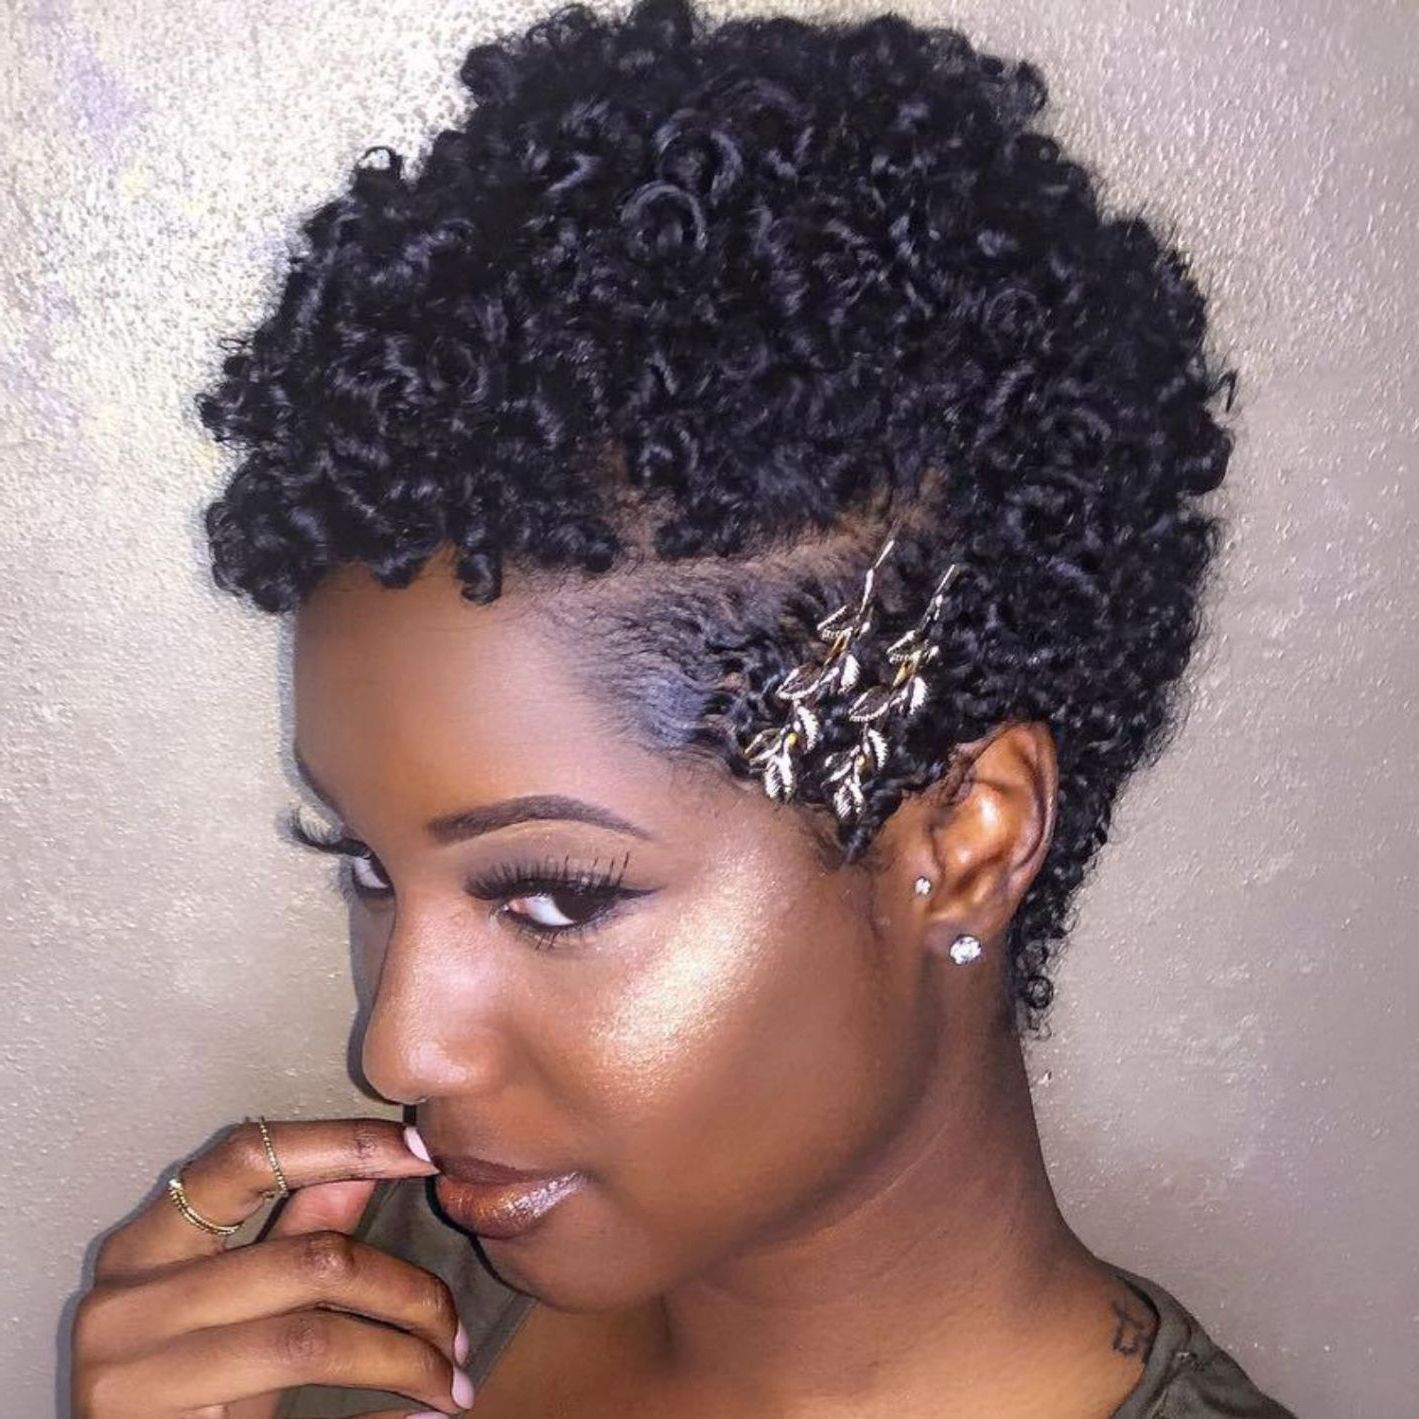 75 Most Inspiring Natural Hairstyles For Short Hair | Hairstyles With Regard To Curly Black Short Hairstyles (Photo 24 of 25)